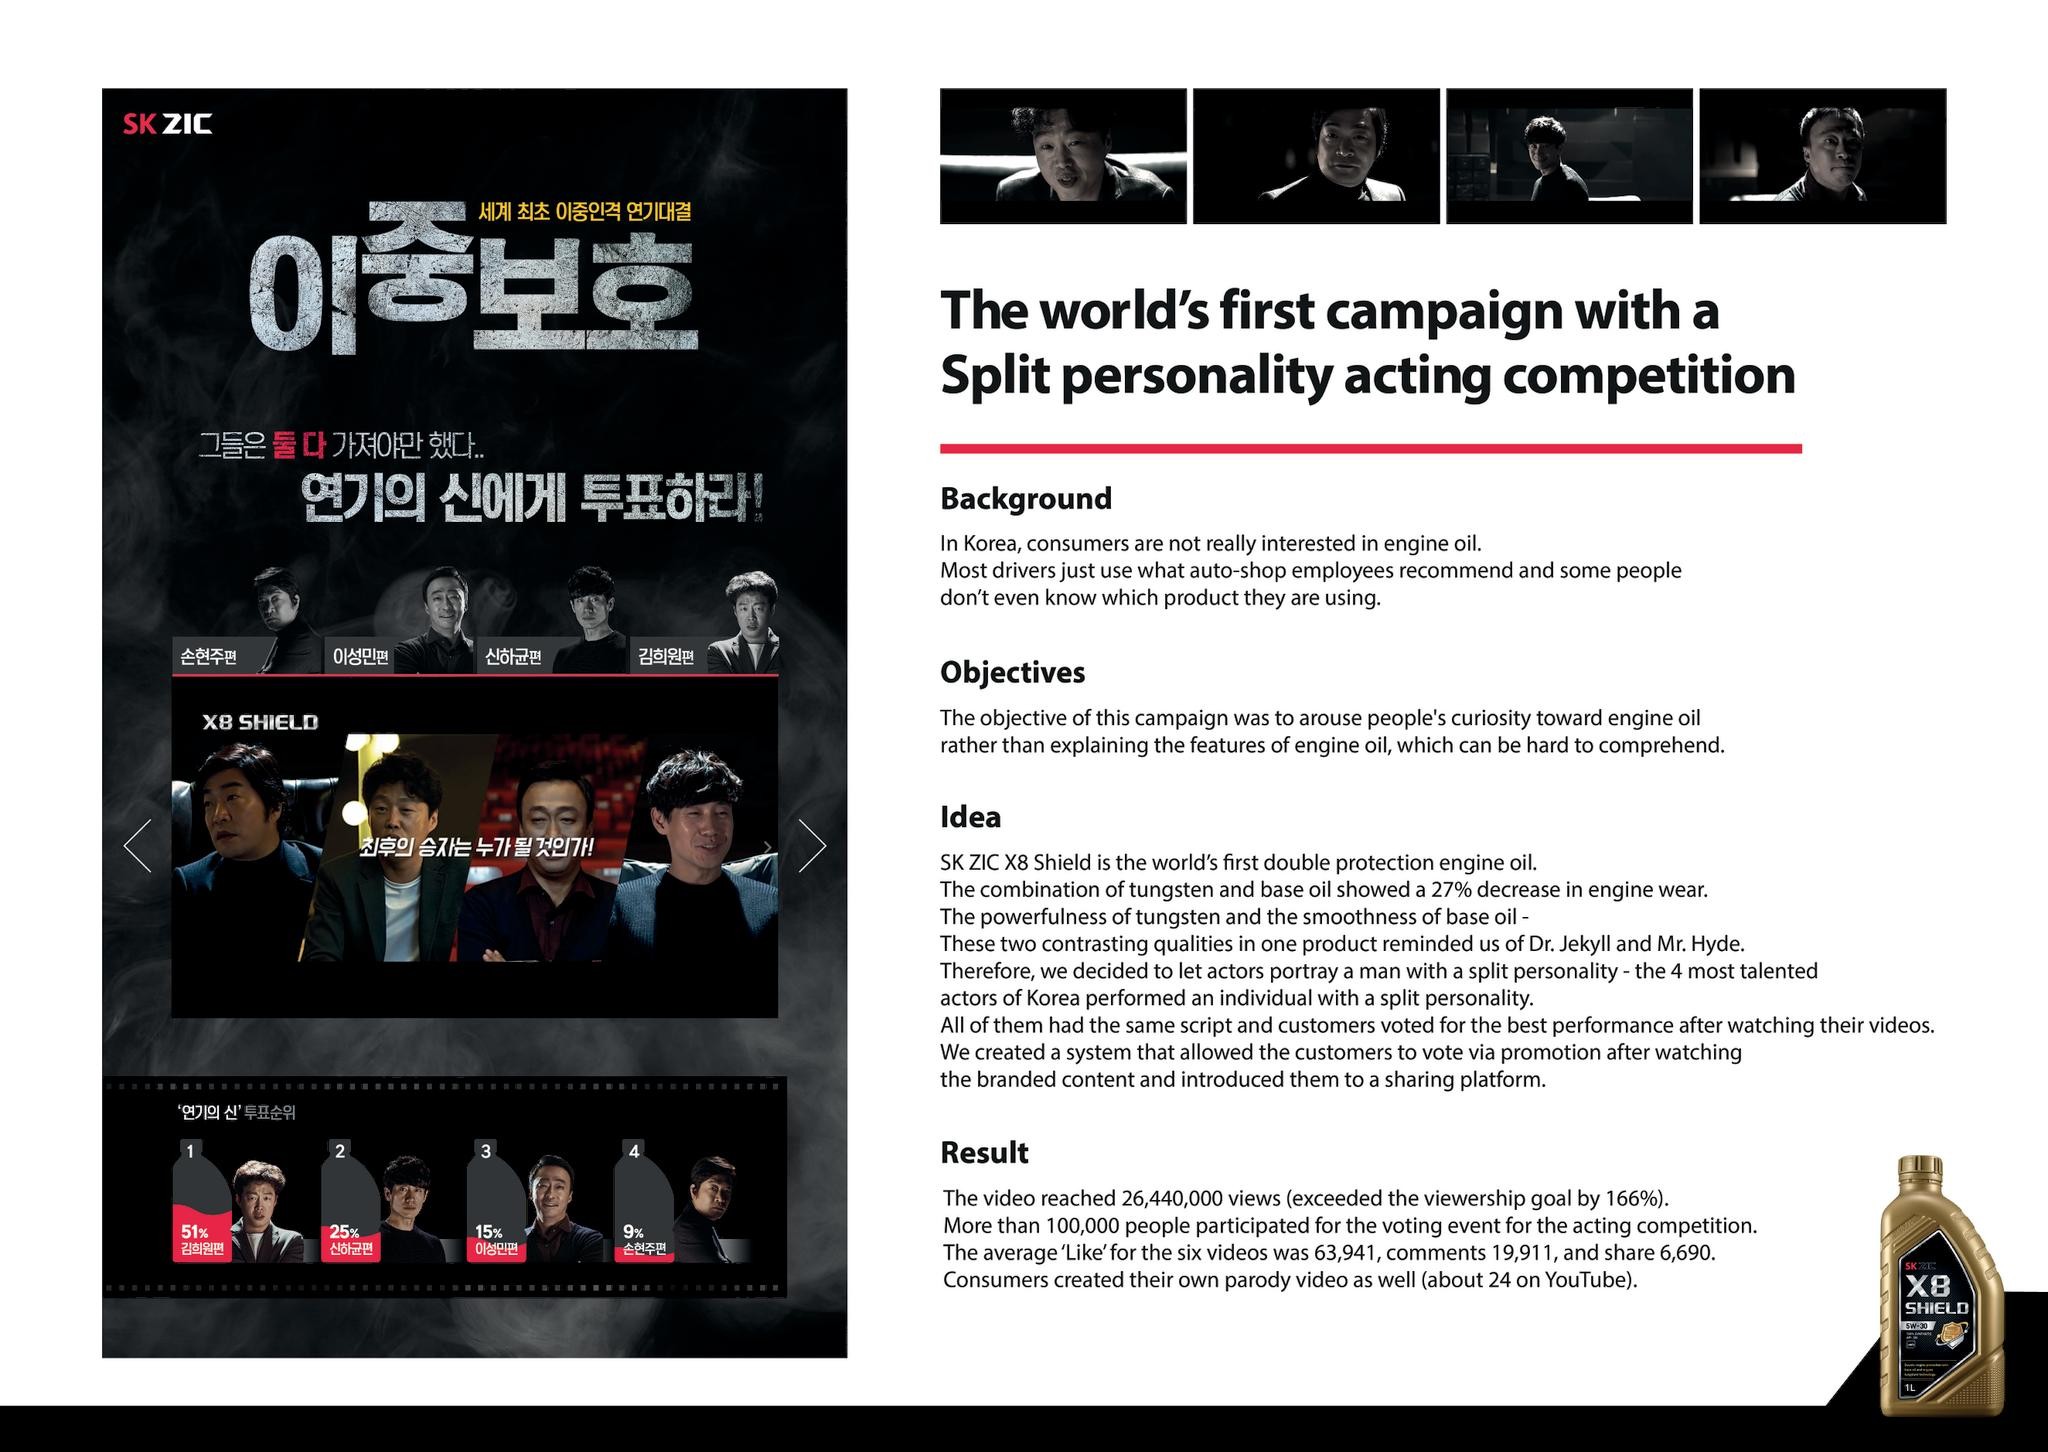 The world’s first campaign with Split personality acting competition